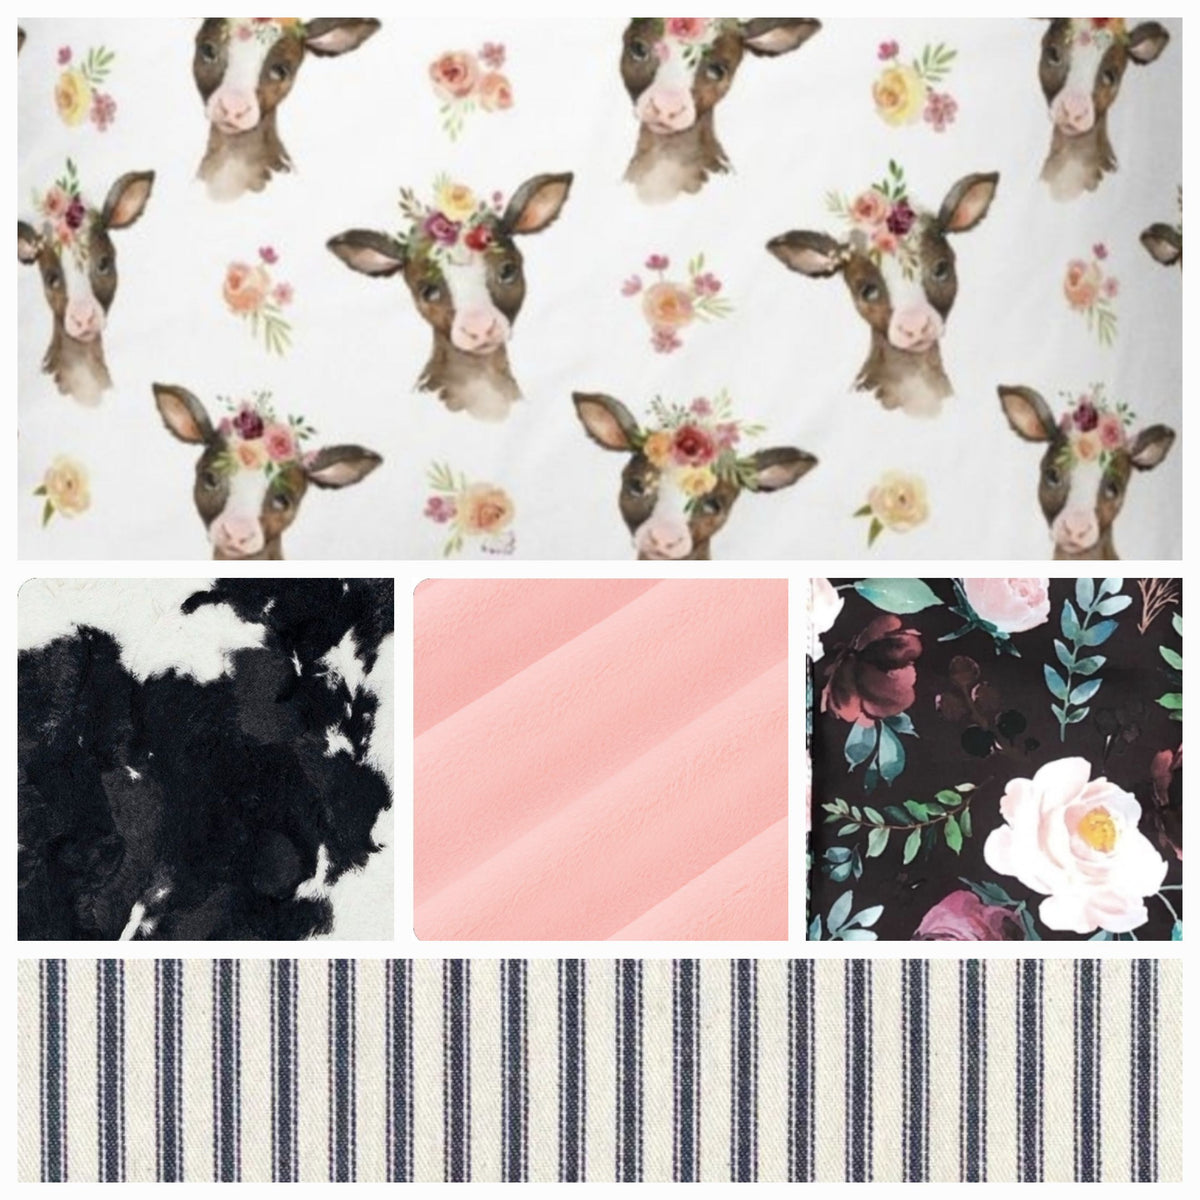 New Release Girl Crib Bedding- Baby Cows and Wine Floral Baby Bedding Collection - DBC Baby Bedding Co 